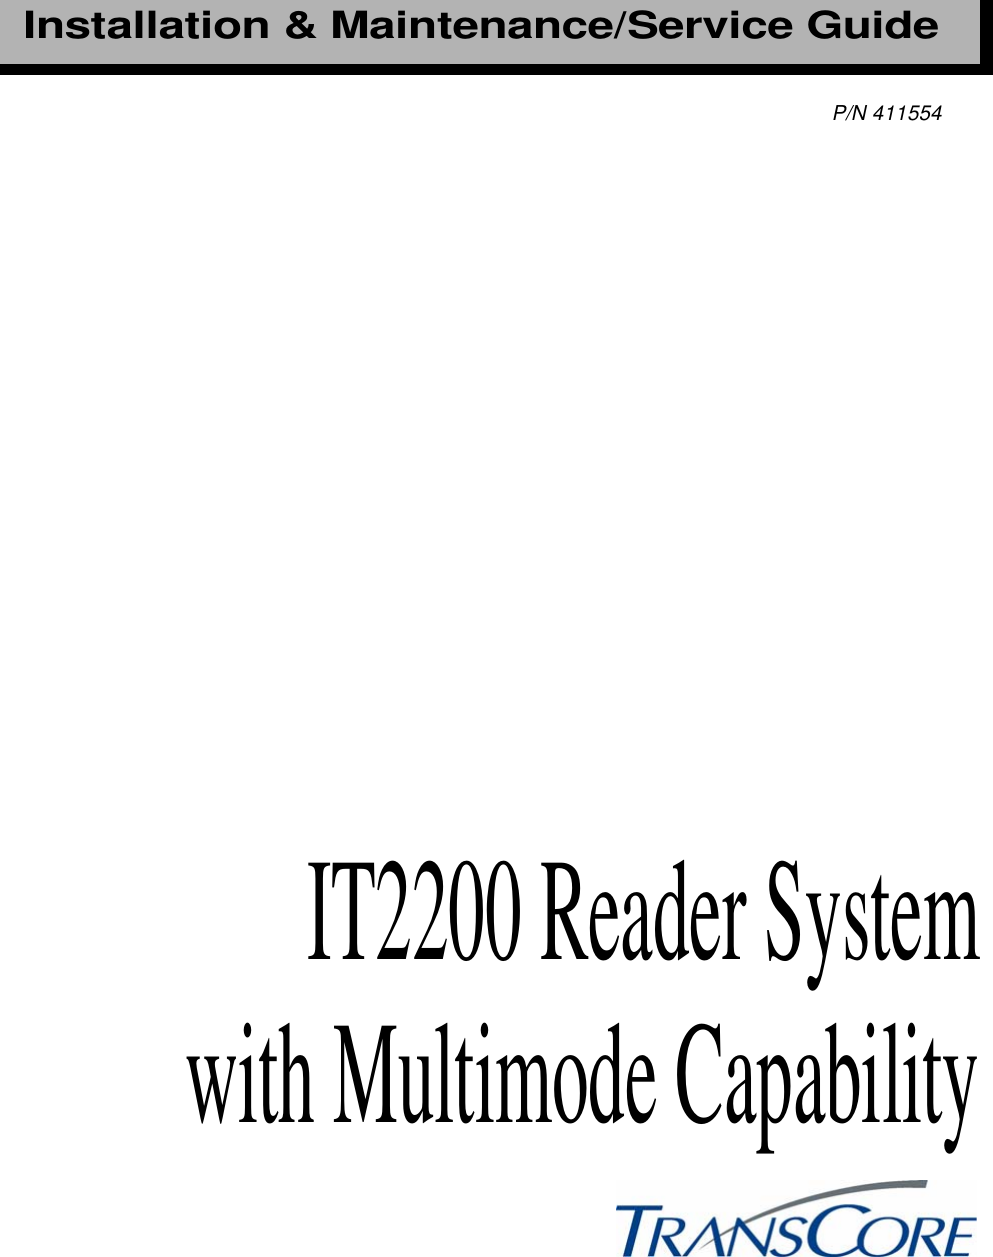 IT2200 Reader SystemP/N 411554Installation &amp; Maintenance/Service Guidewith Multimode Capability